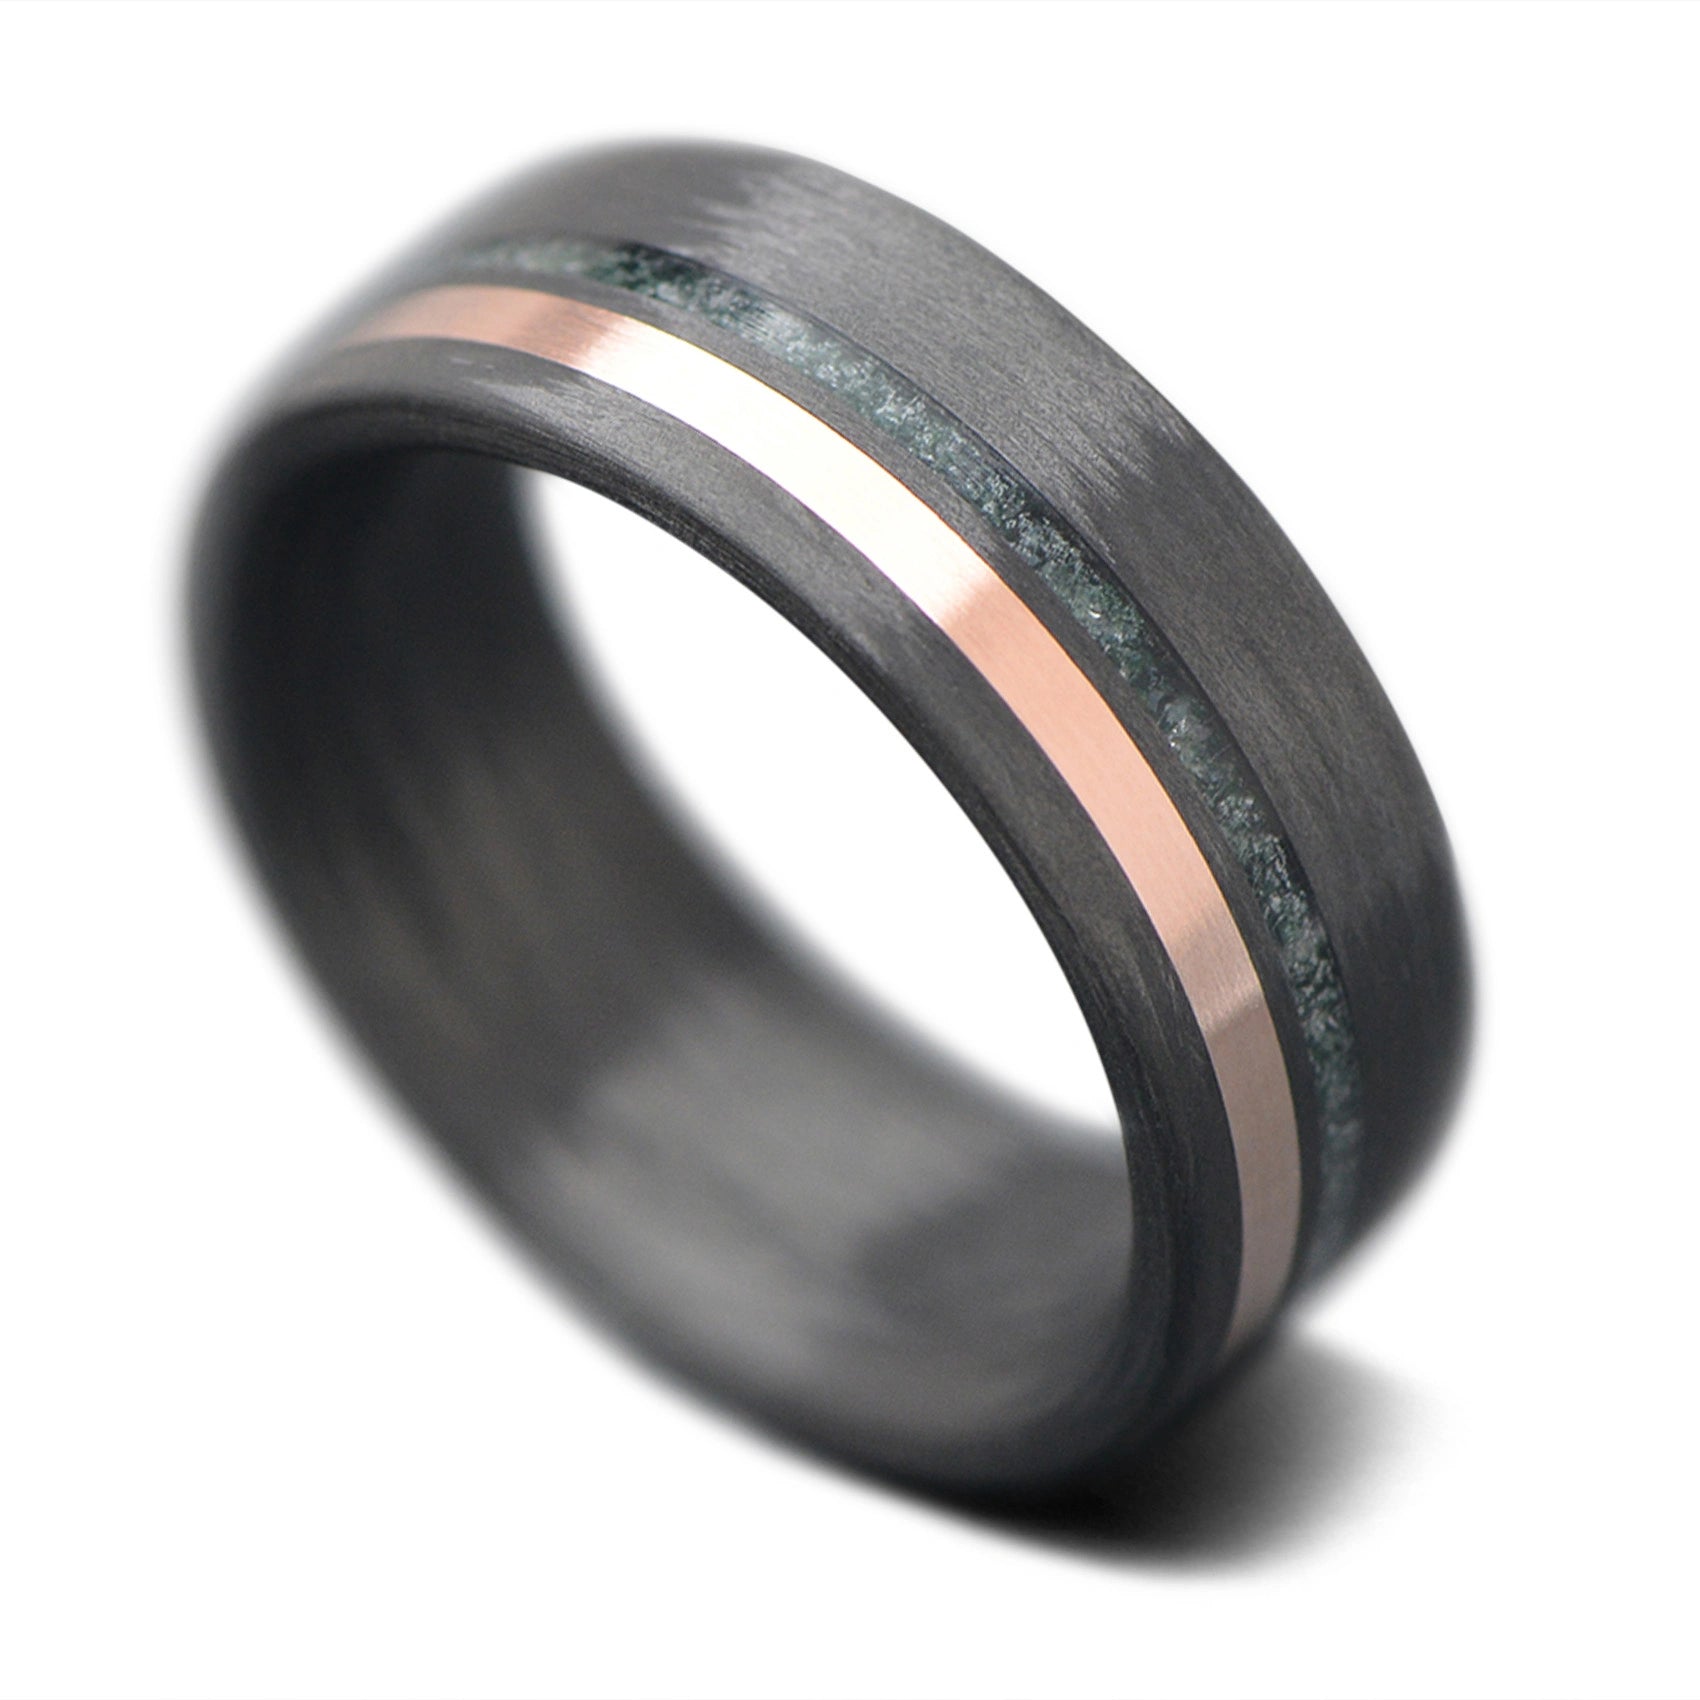 CarbonUni Core Ring with Mahogany, Moss Agate, Rose Gold inlay, 8mm -THE INNOVATOR